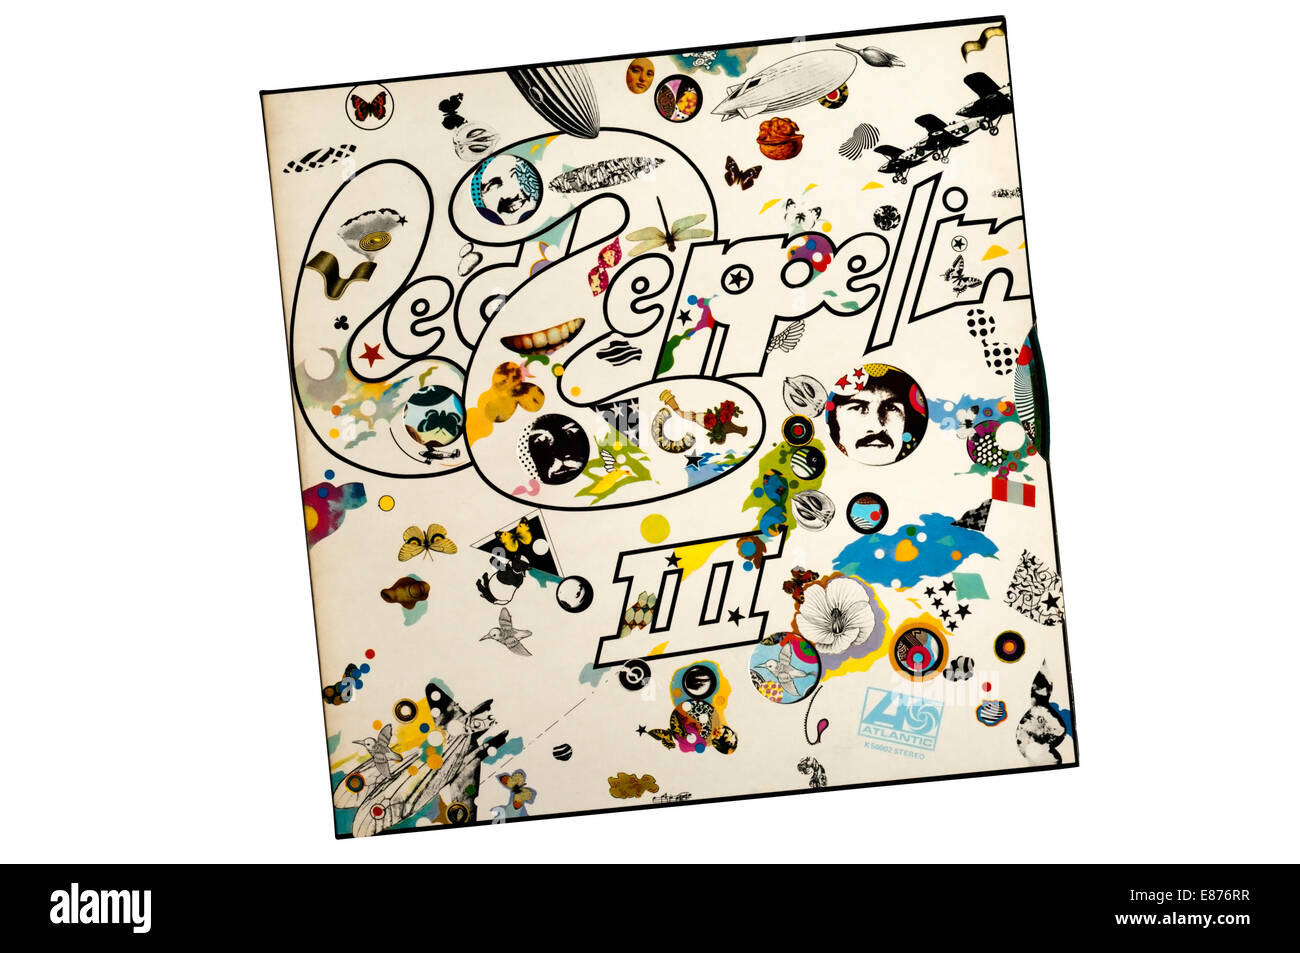 Led Zeppelin III was the 3rd studio album by the English rock band Led  Zeppelin. It was released in 1970 by Atlantic Records Stock Photo - Alamy